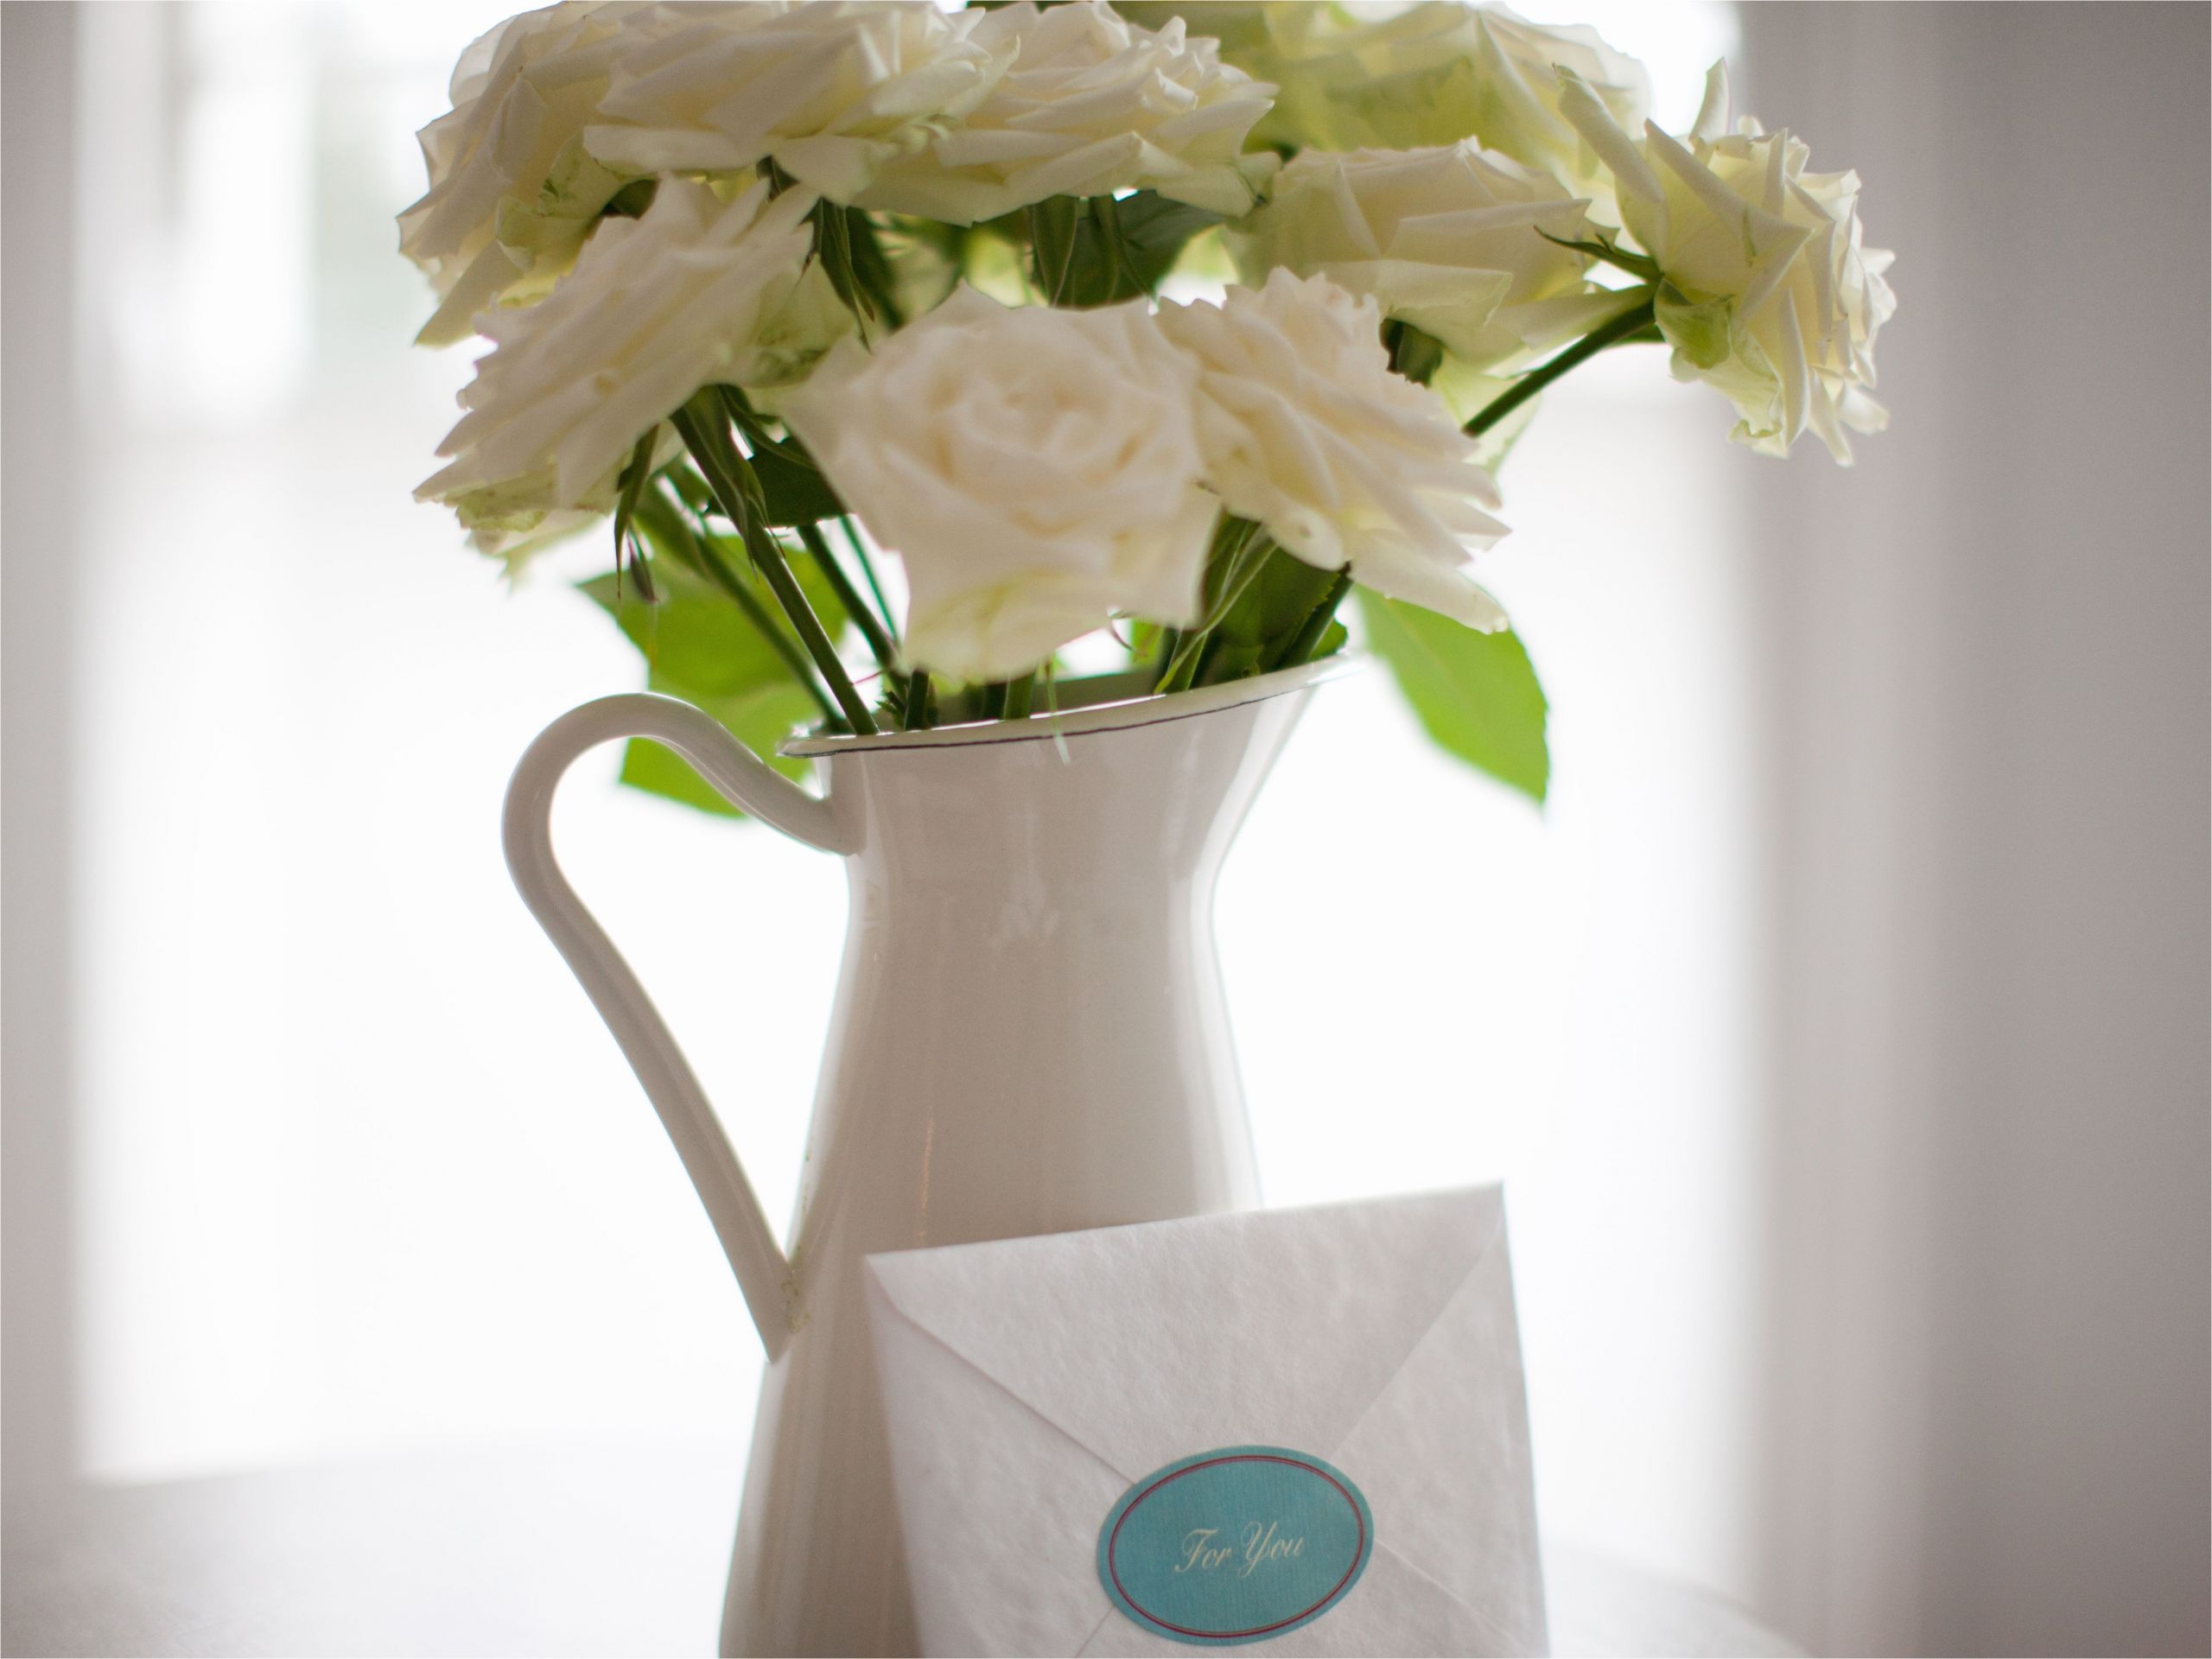 card leaning against white rose bouquet in pitcher 168683856 58d9361e3df78c5162d6ea1b jpg